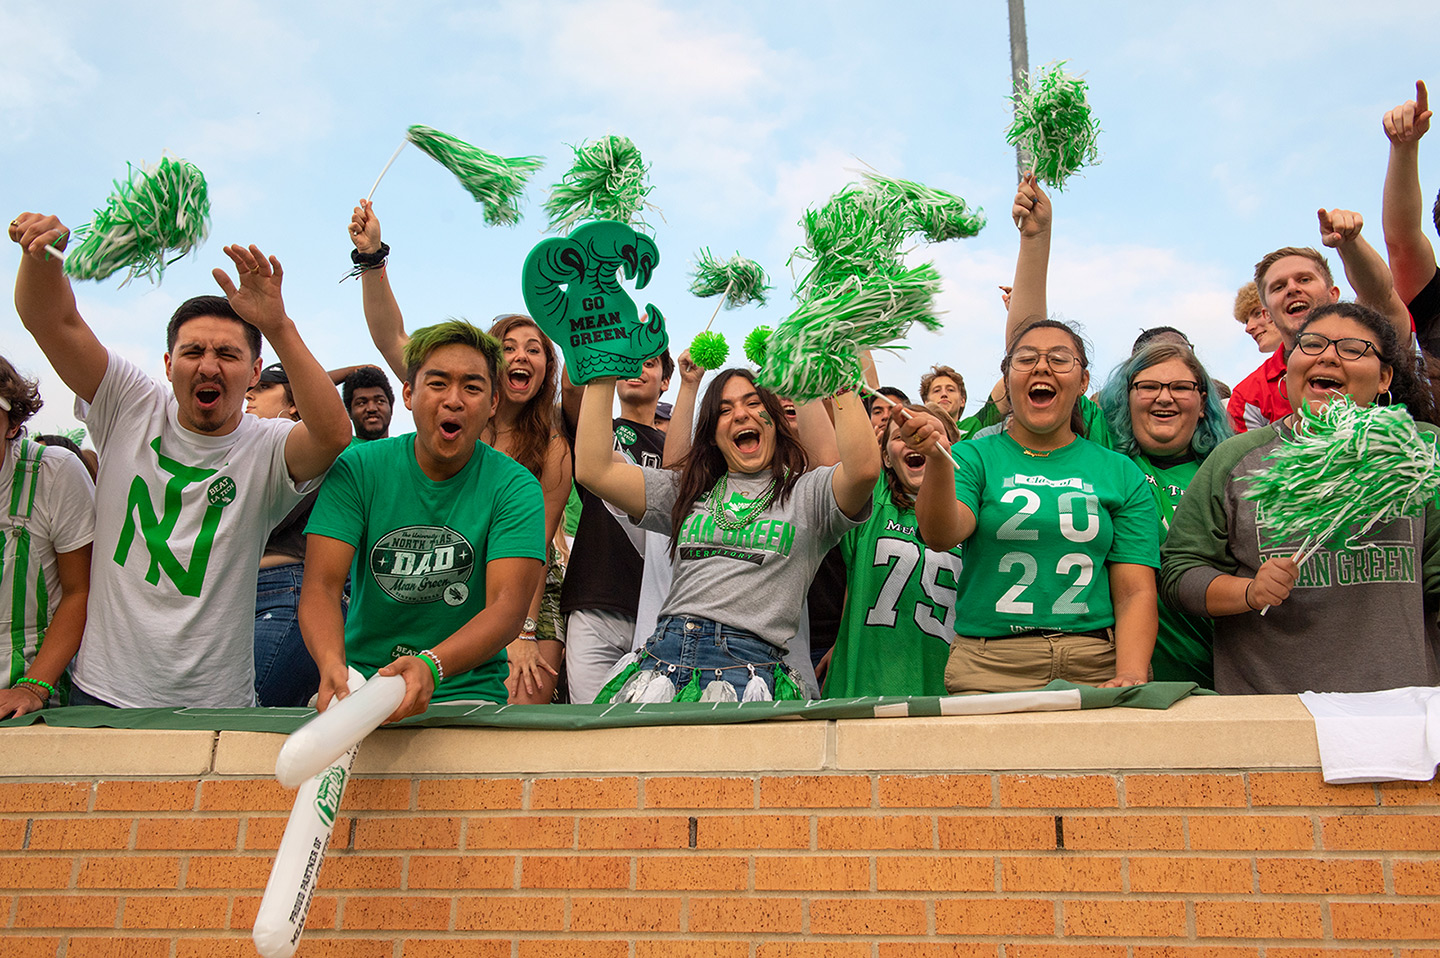 Students cheering at a UNT game